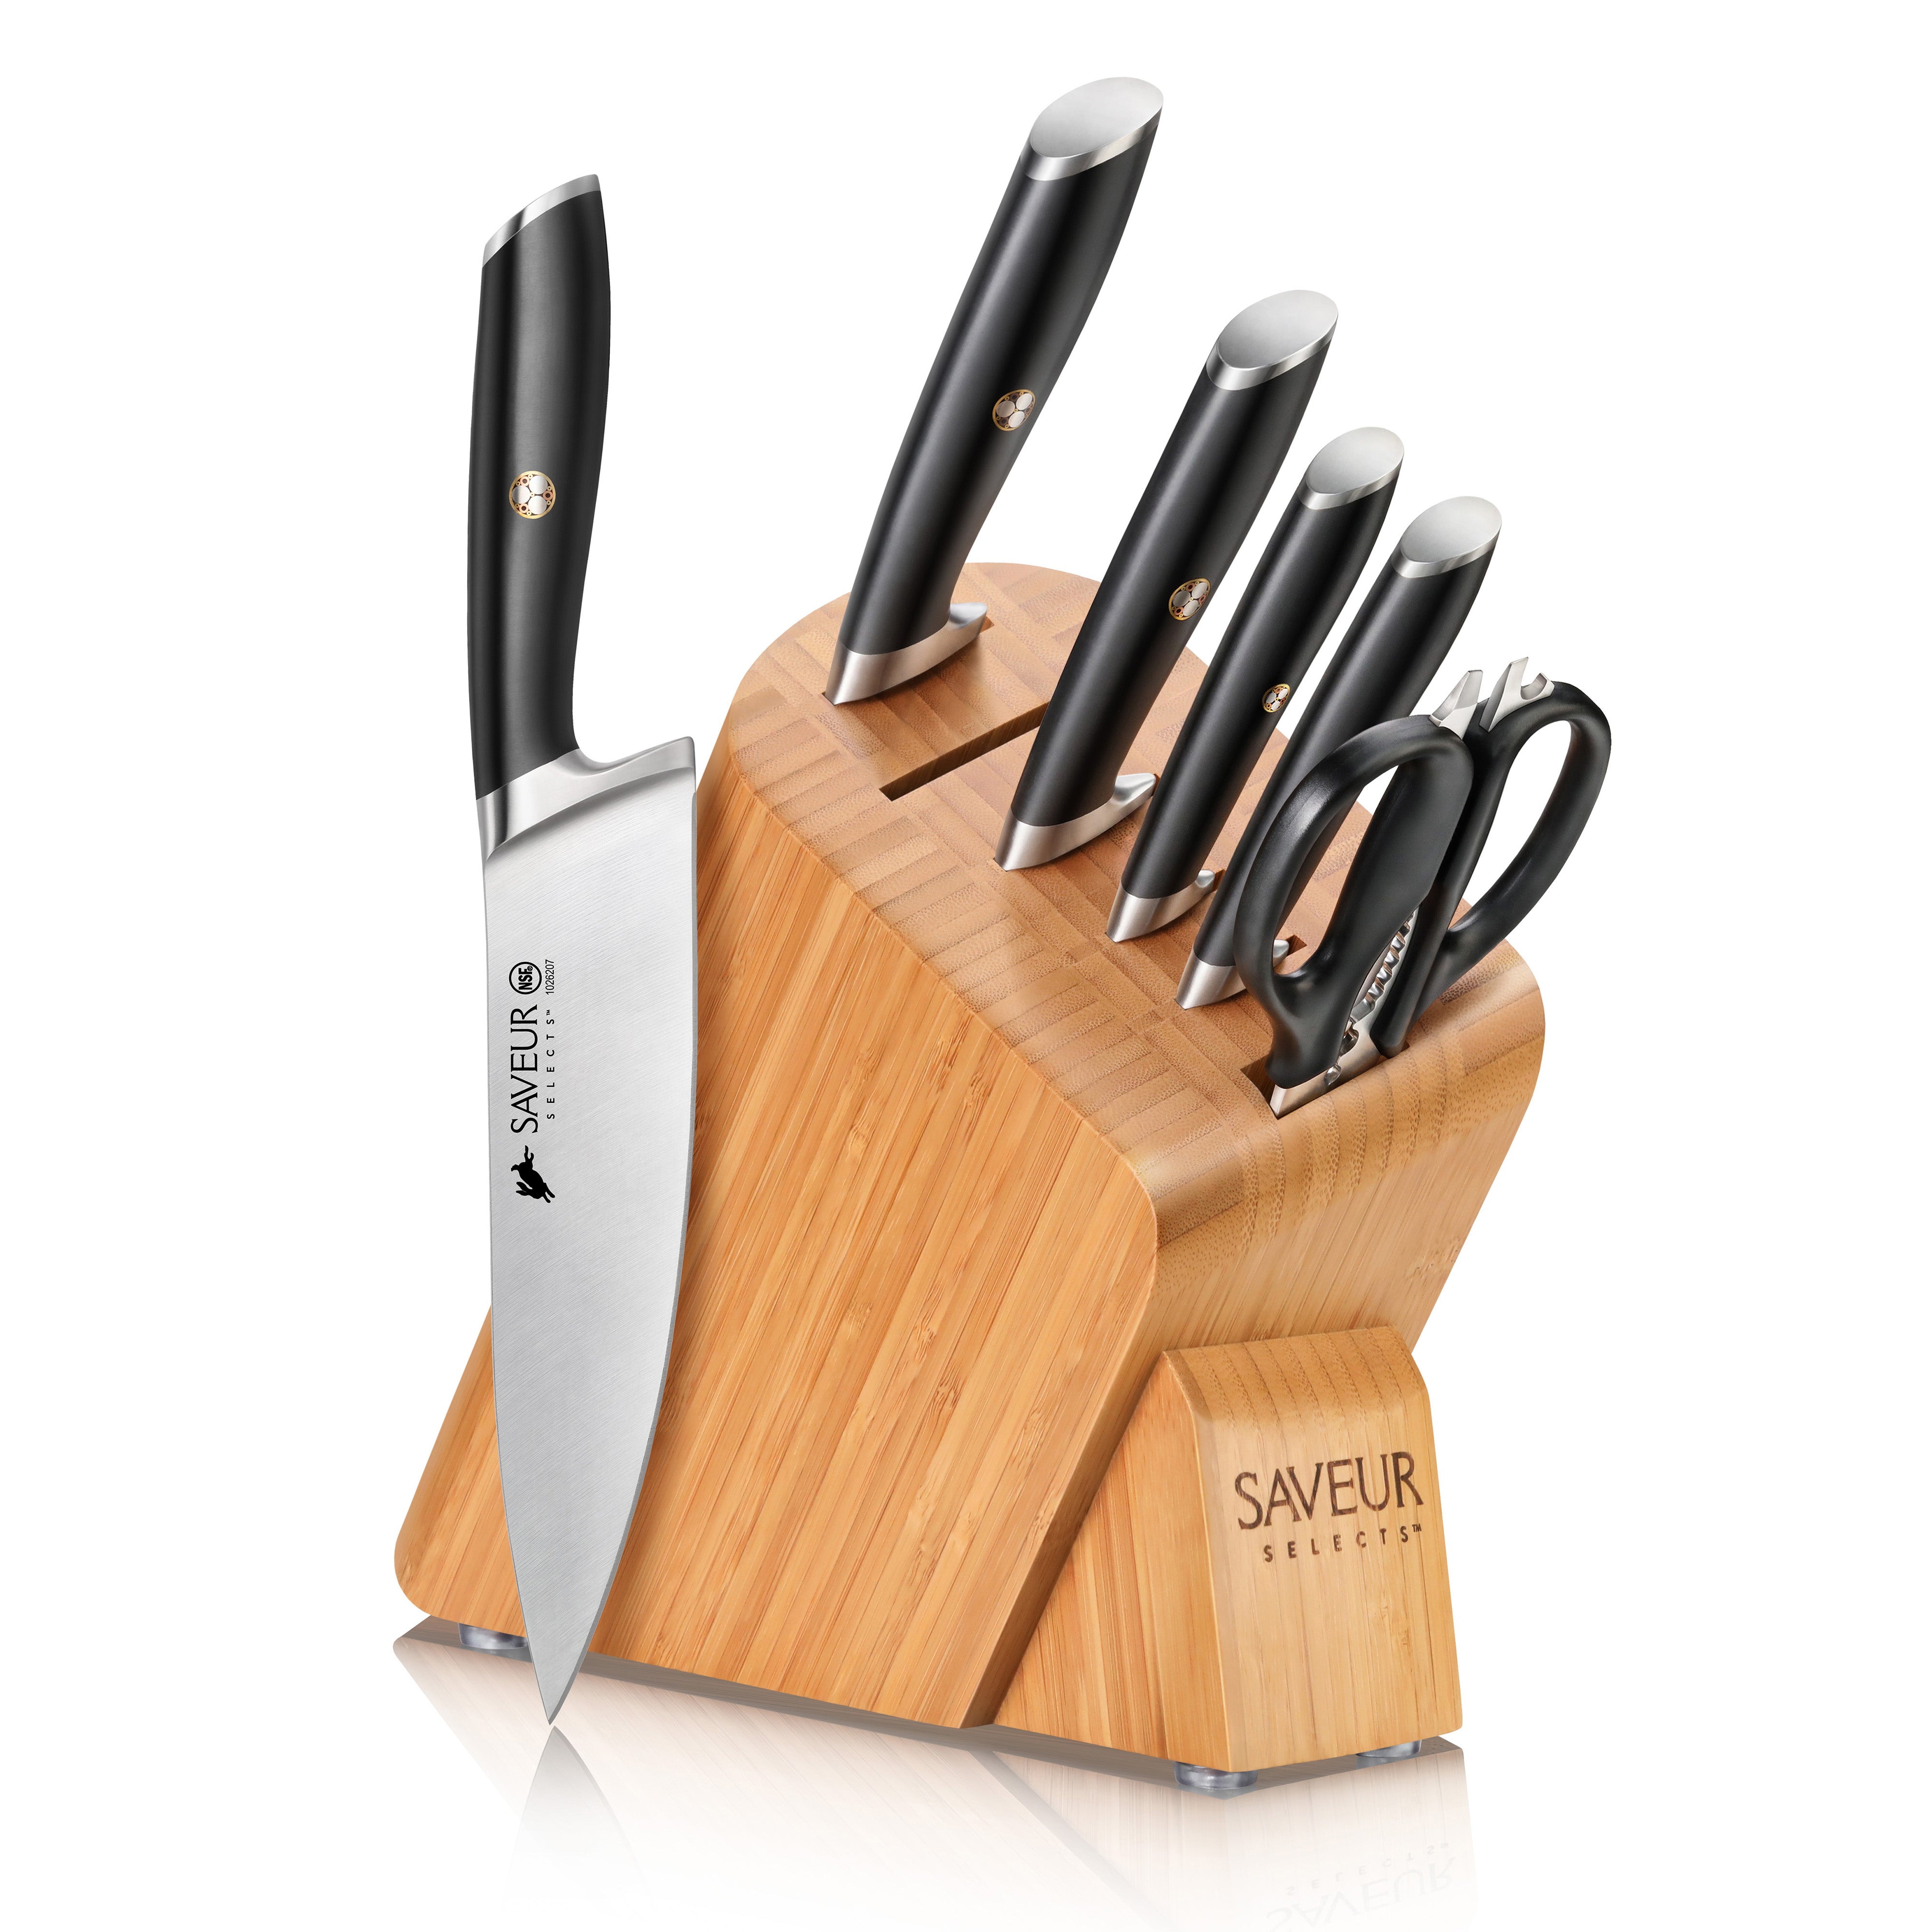 Saveur Selects Block Company Set, 7-Piece 1026313 Cutlery Knife German Steel, – Forged Cangshan